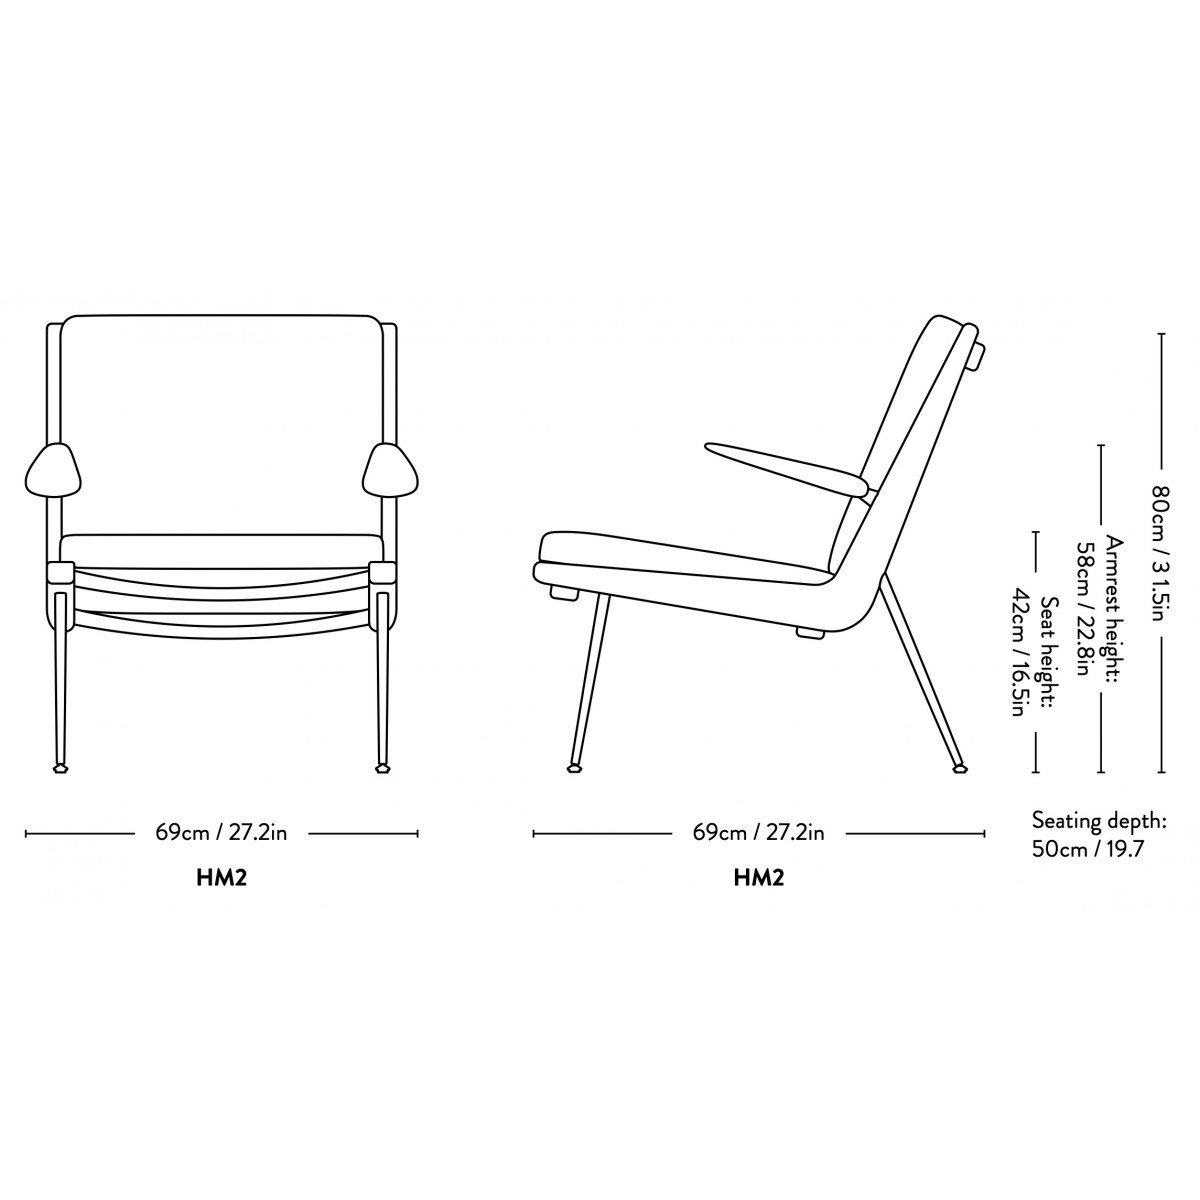 with armrests – Boomerang lounge chair HM2